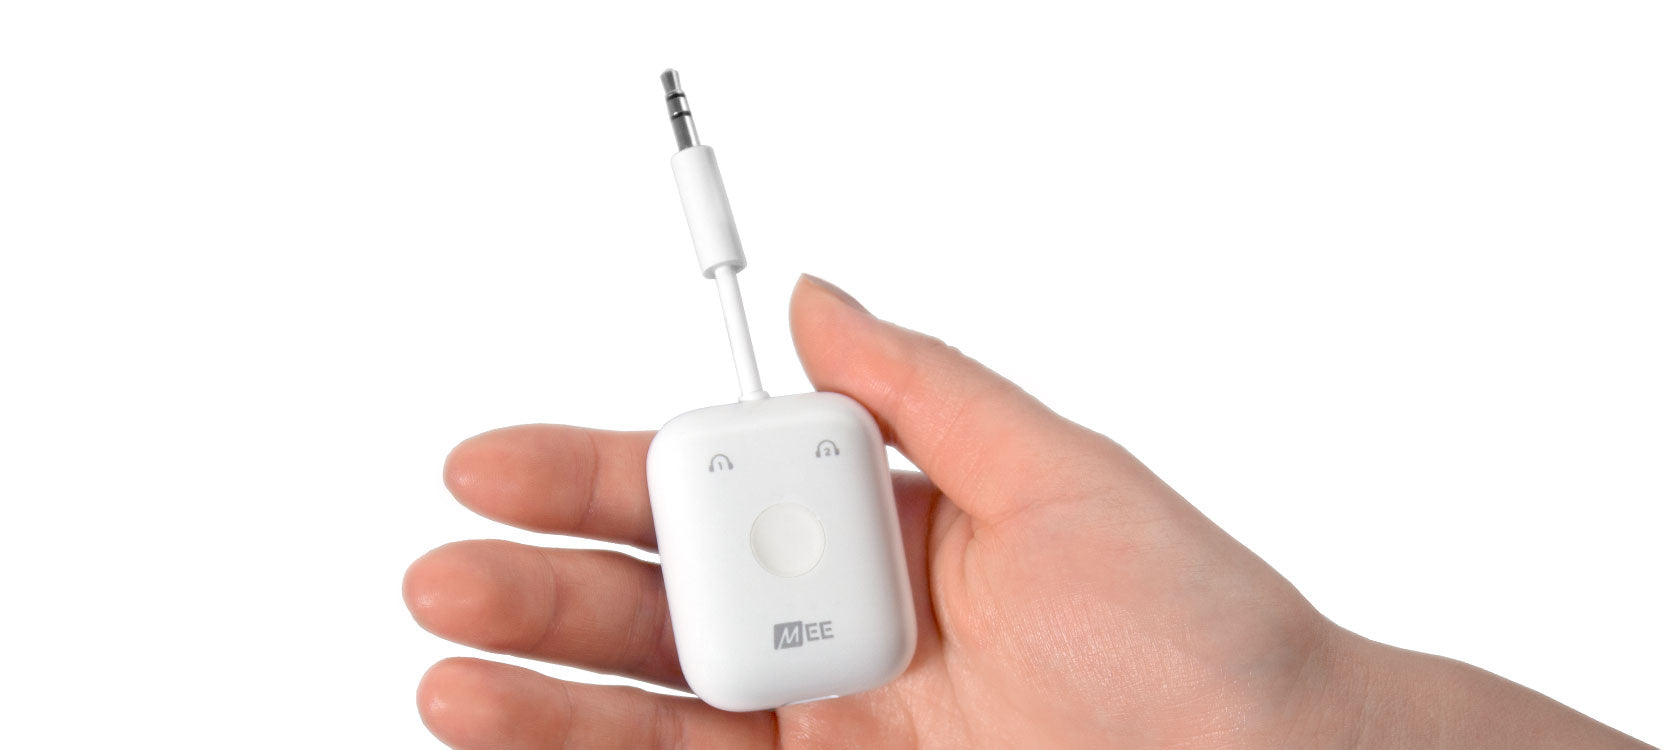 A hand holding a small white audio bluetooth receiver with a single button and company logo, set against a white background.